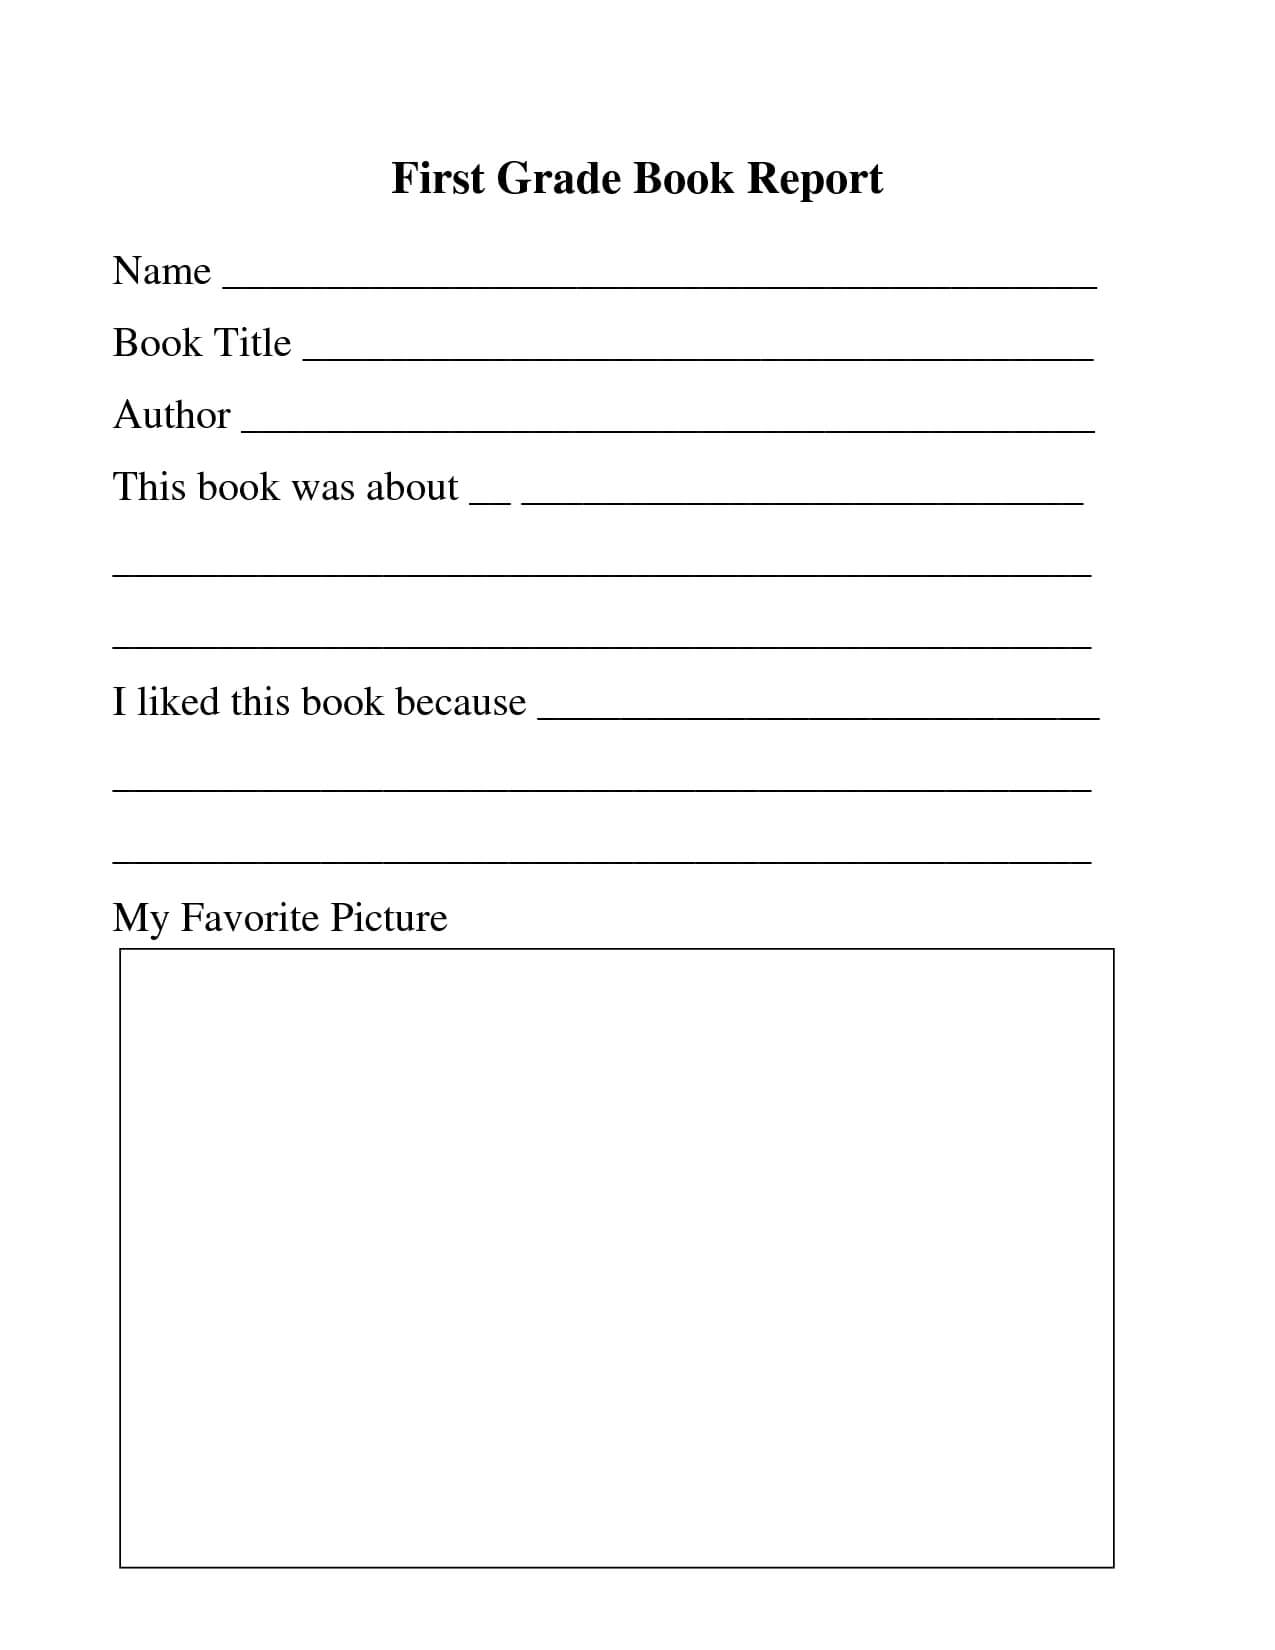 28 Images Of Template For First Grade List | Masorler With 1St Grade Book Report Template